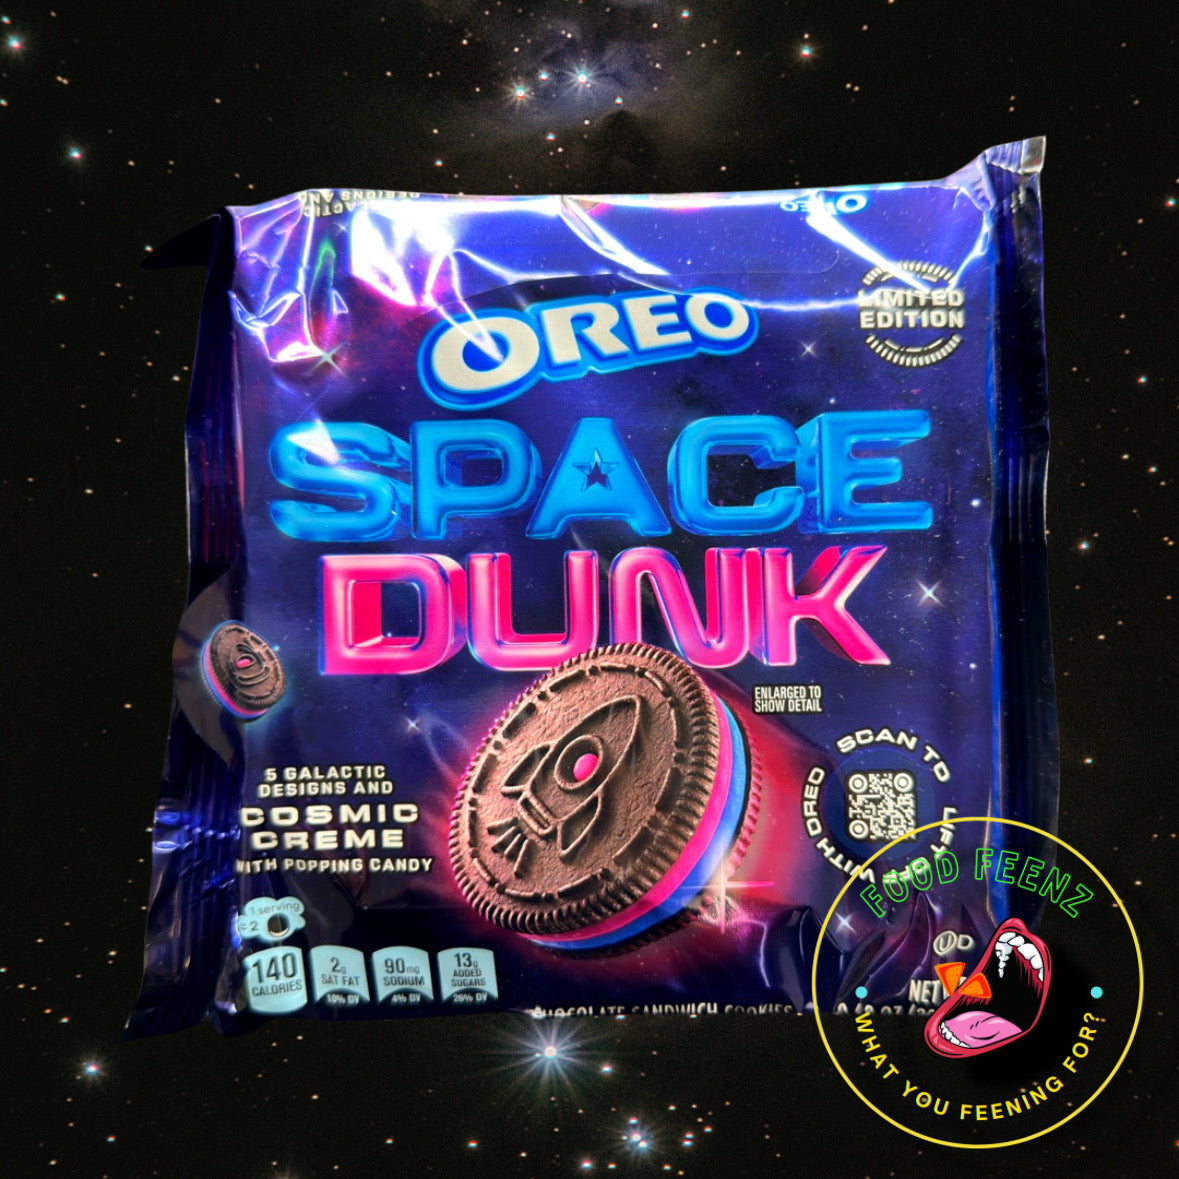 Oreo Space Dunk Flavor - Limited Edition